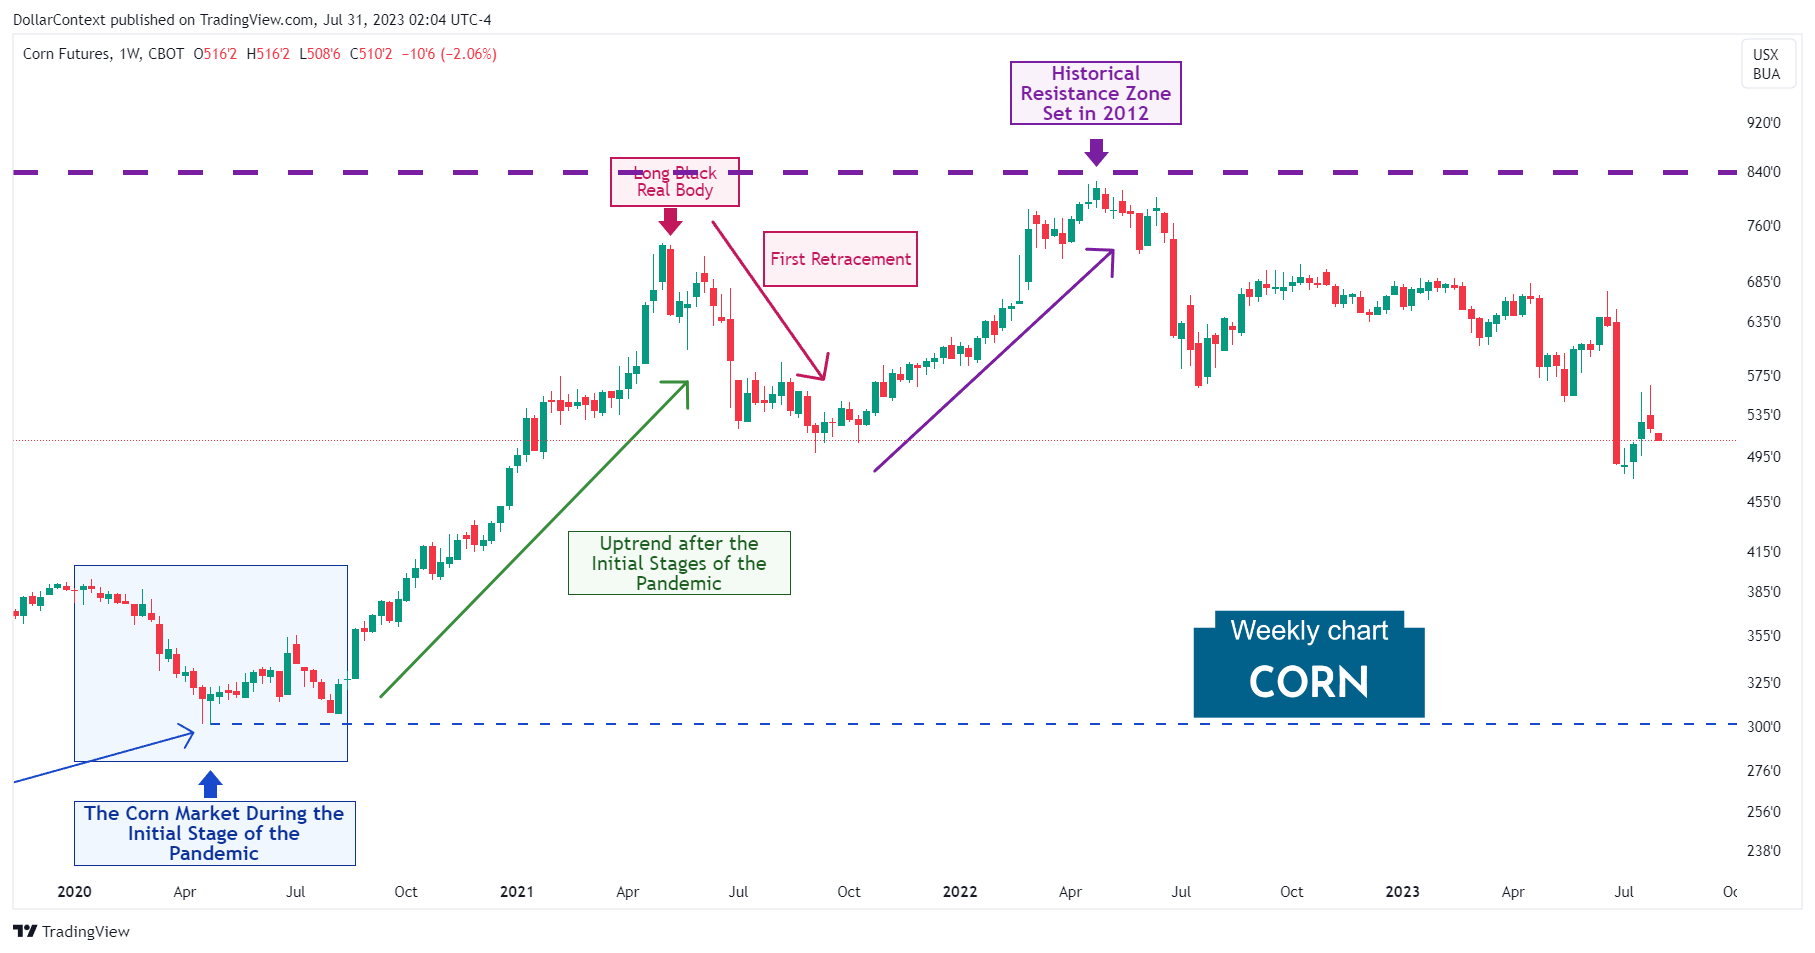 The Highs of Corn Prices in 2022